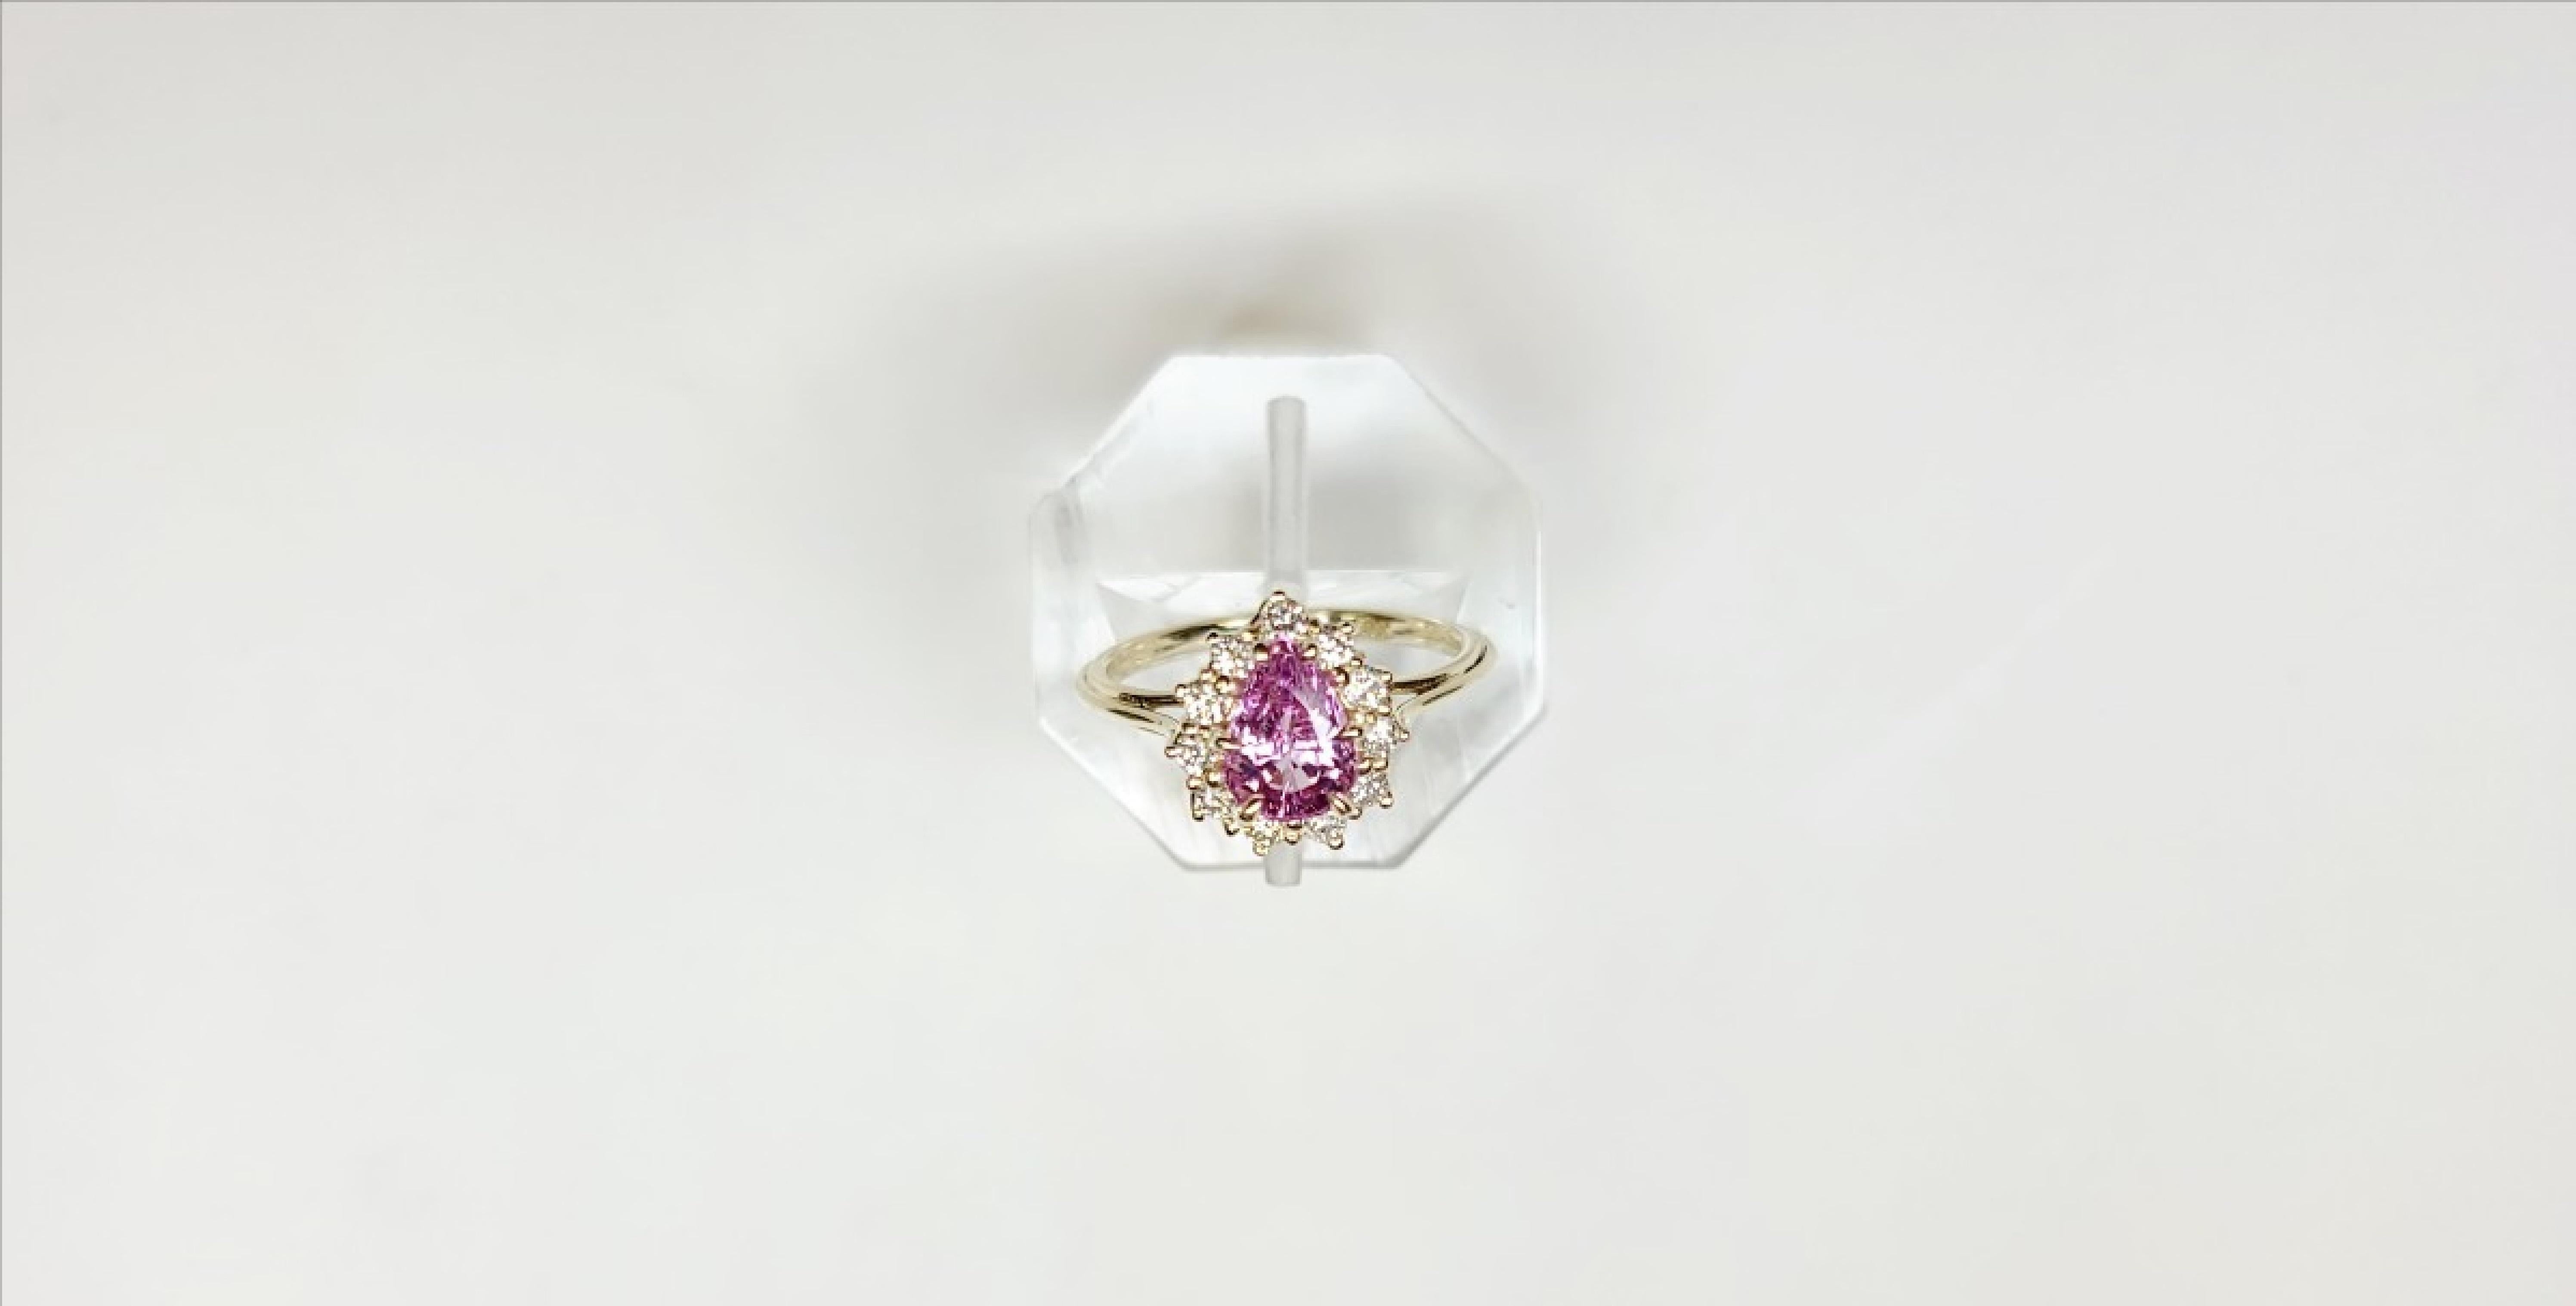 New Cert 1.37 ct Unheated Natural Pink Sapphire Diamond Ring in 14k Gold For Sale 13